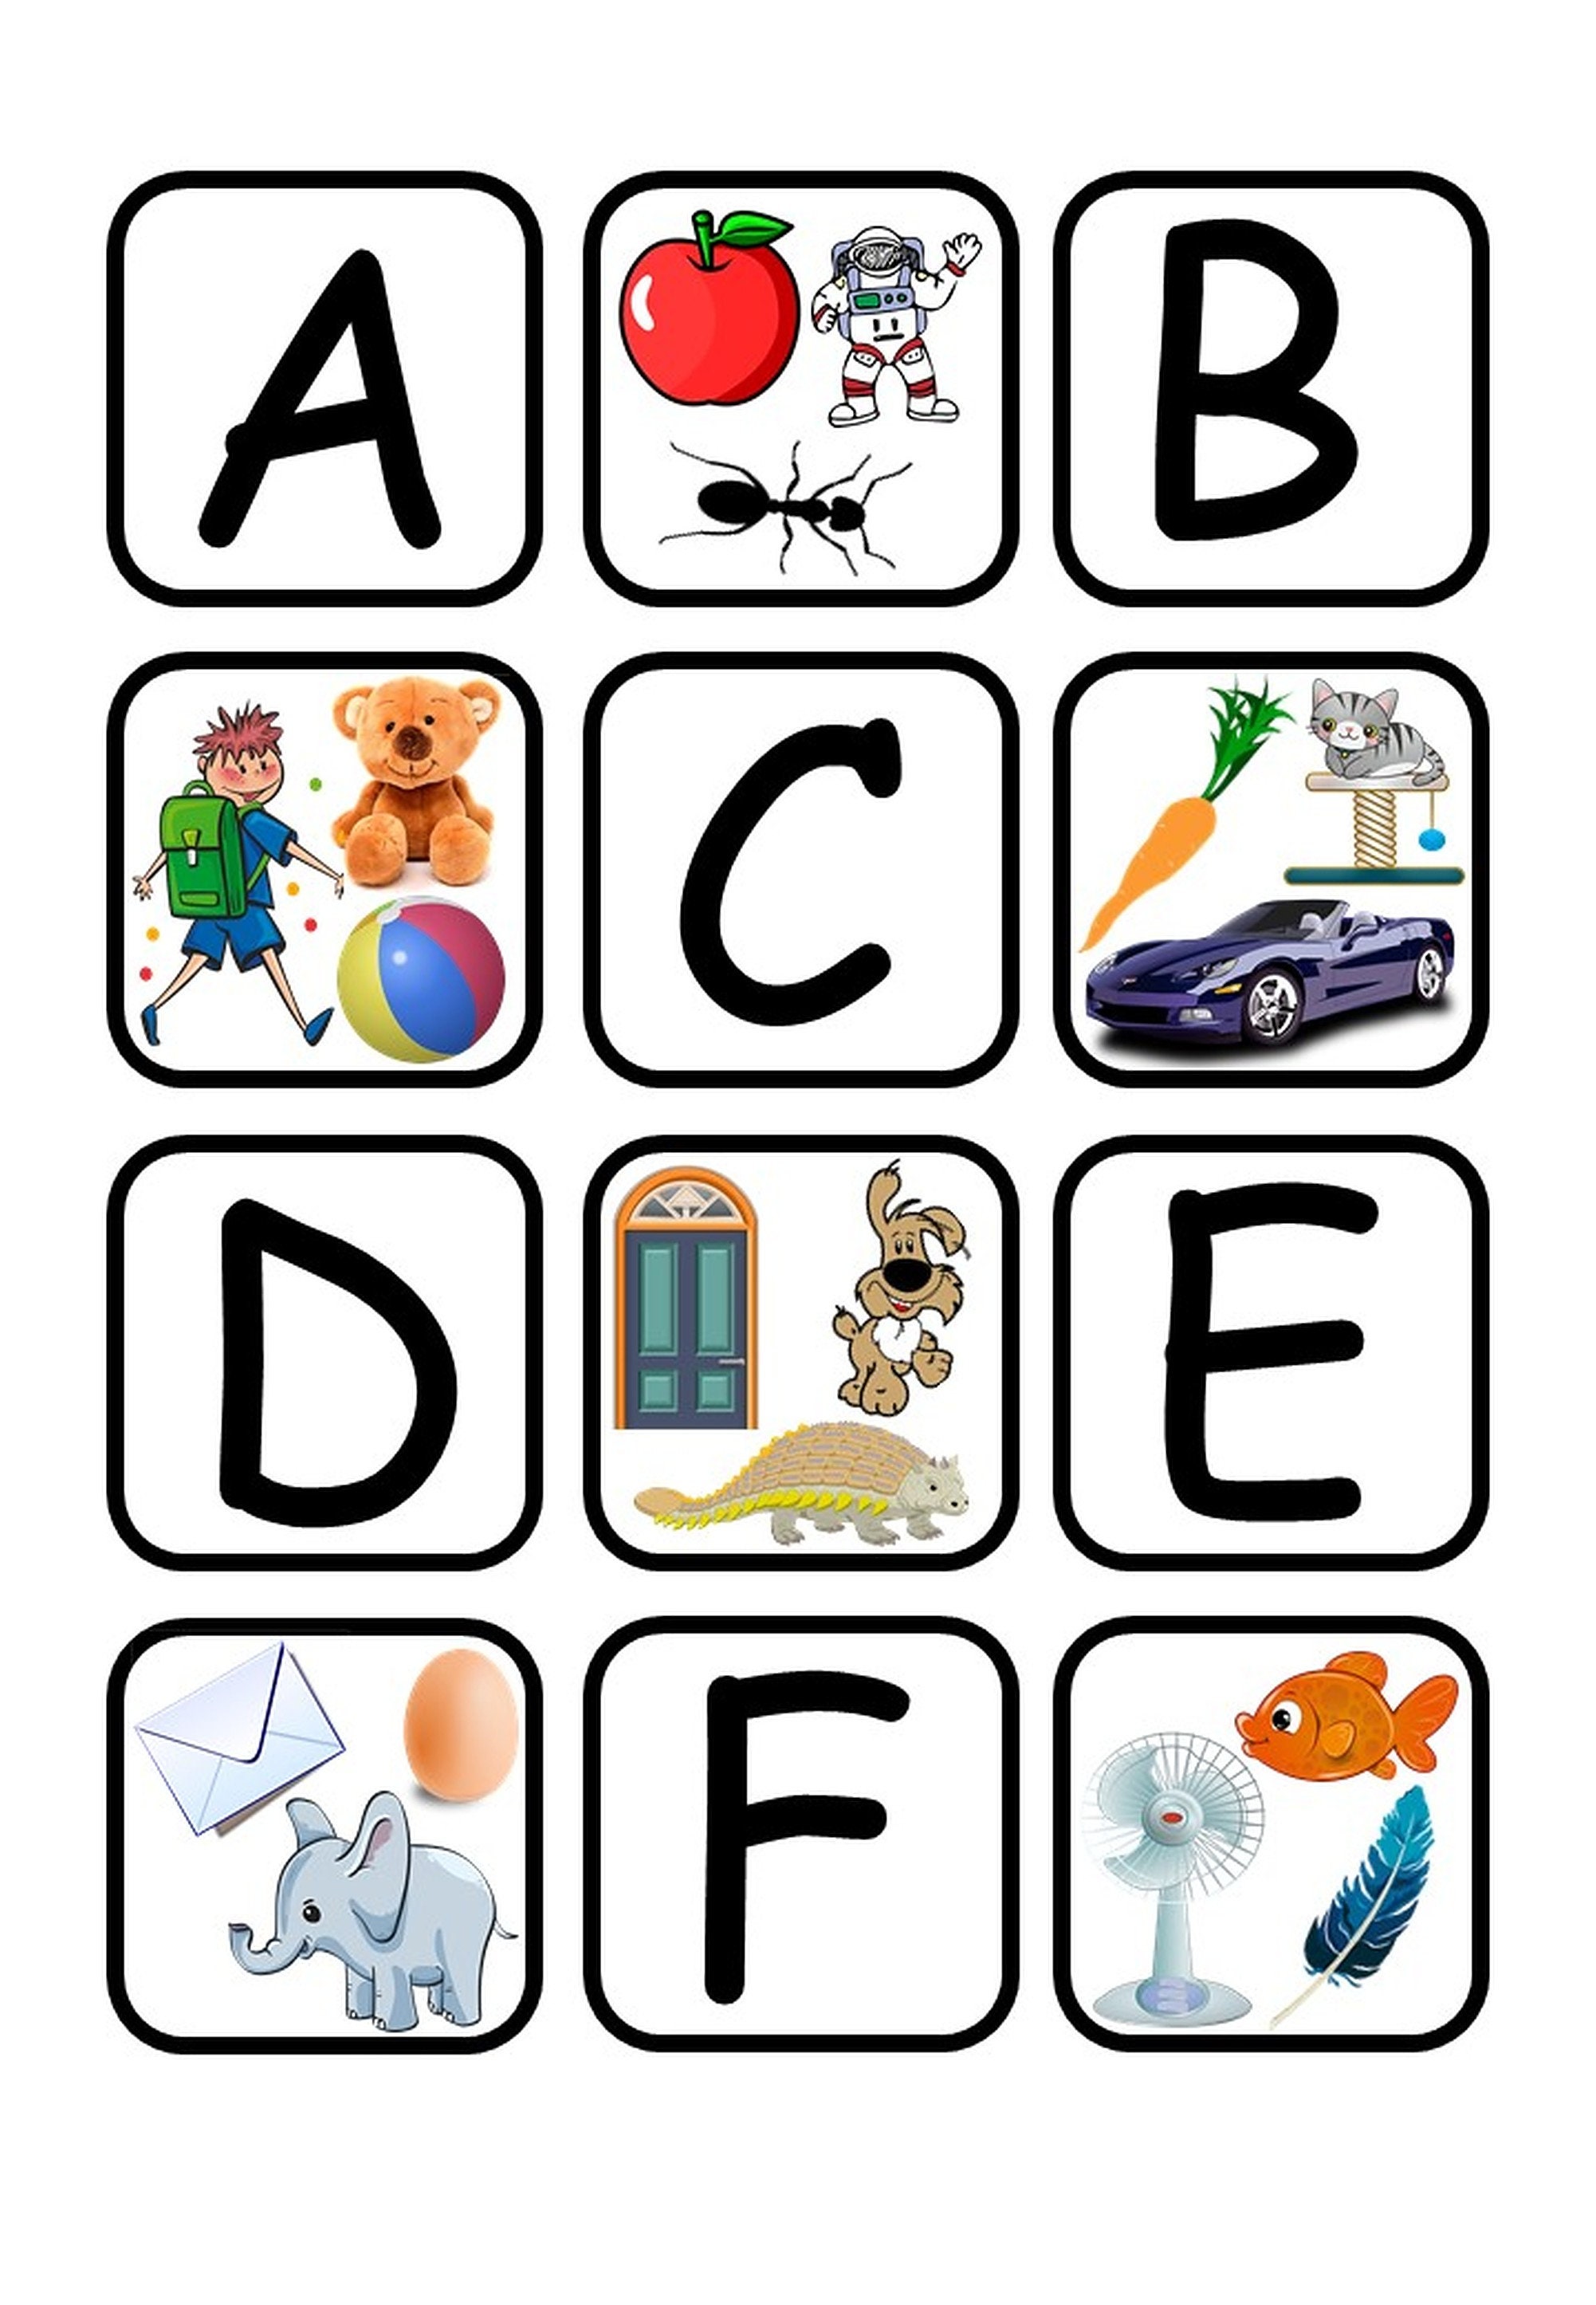 alphabet-memory-game-printable-with-multi-image-cards-etsy